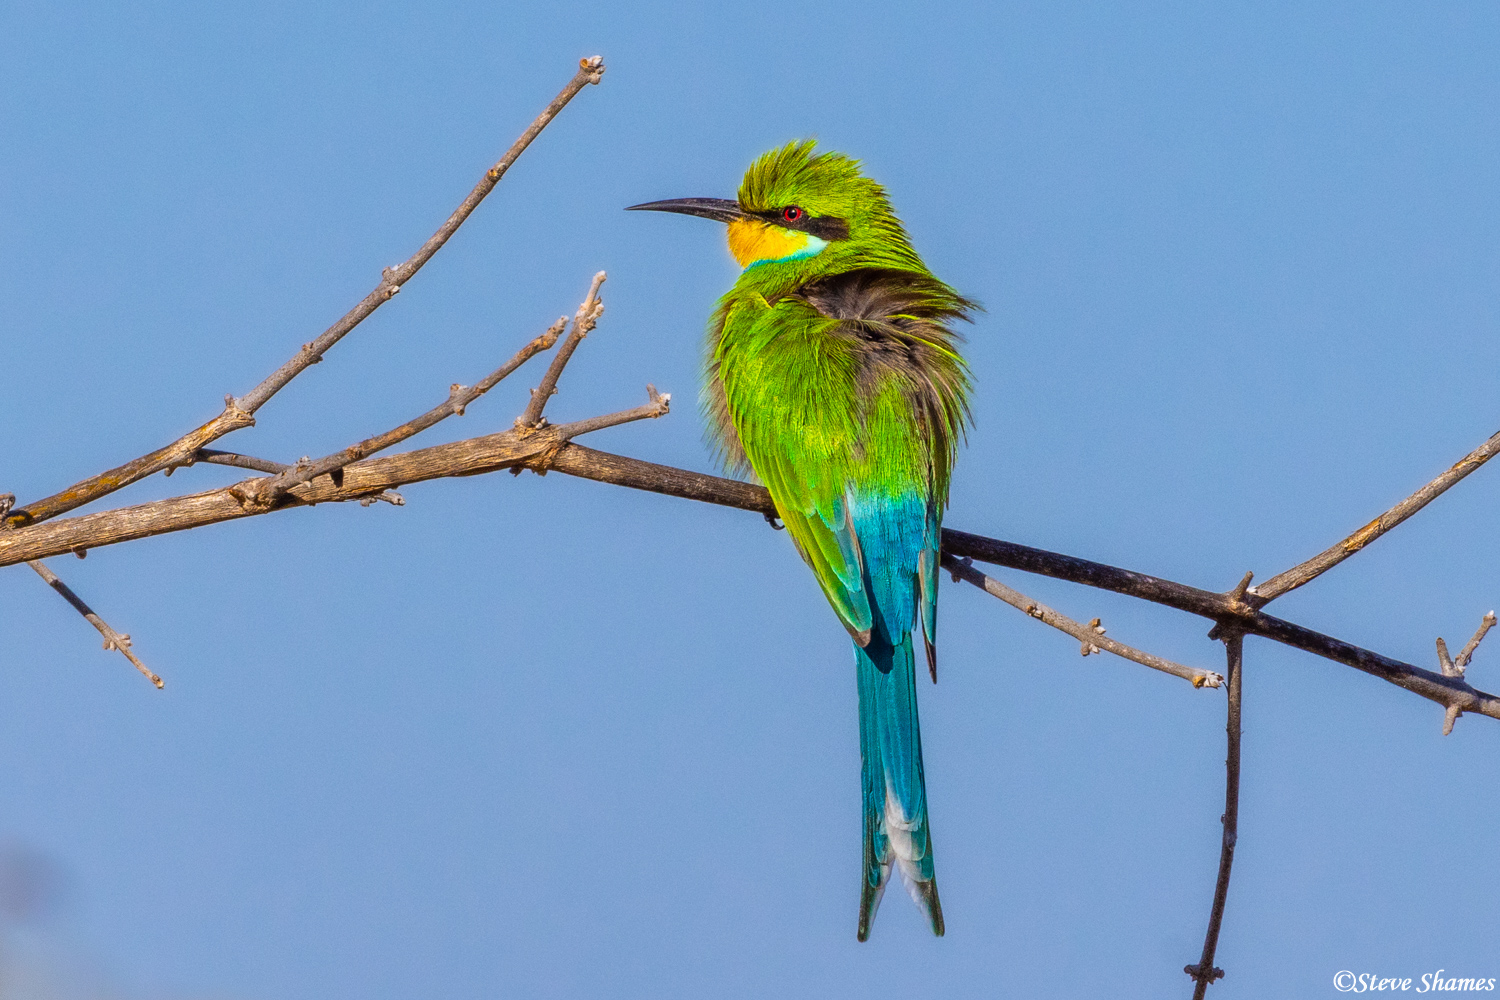 A very colorful green bee-eater. There must be a lot of bees around, since there is no shortage of these bee-eaters.